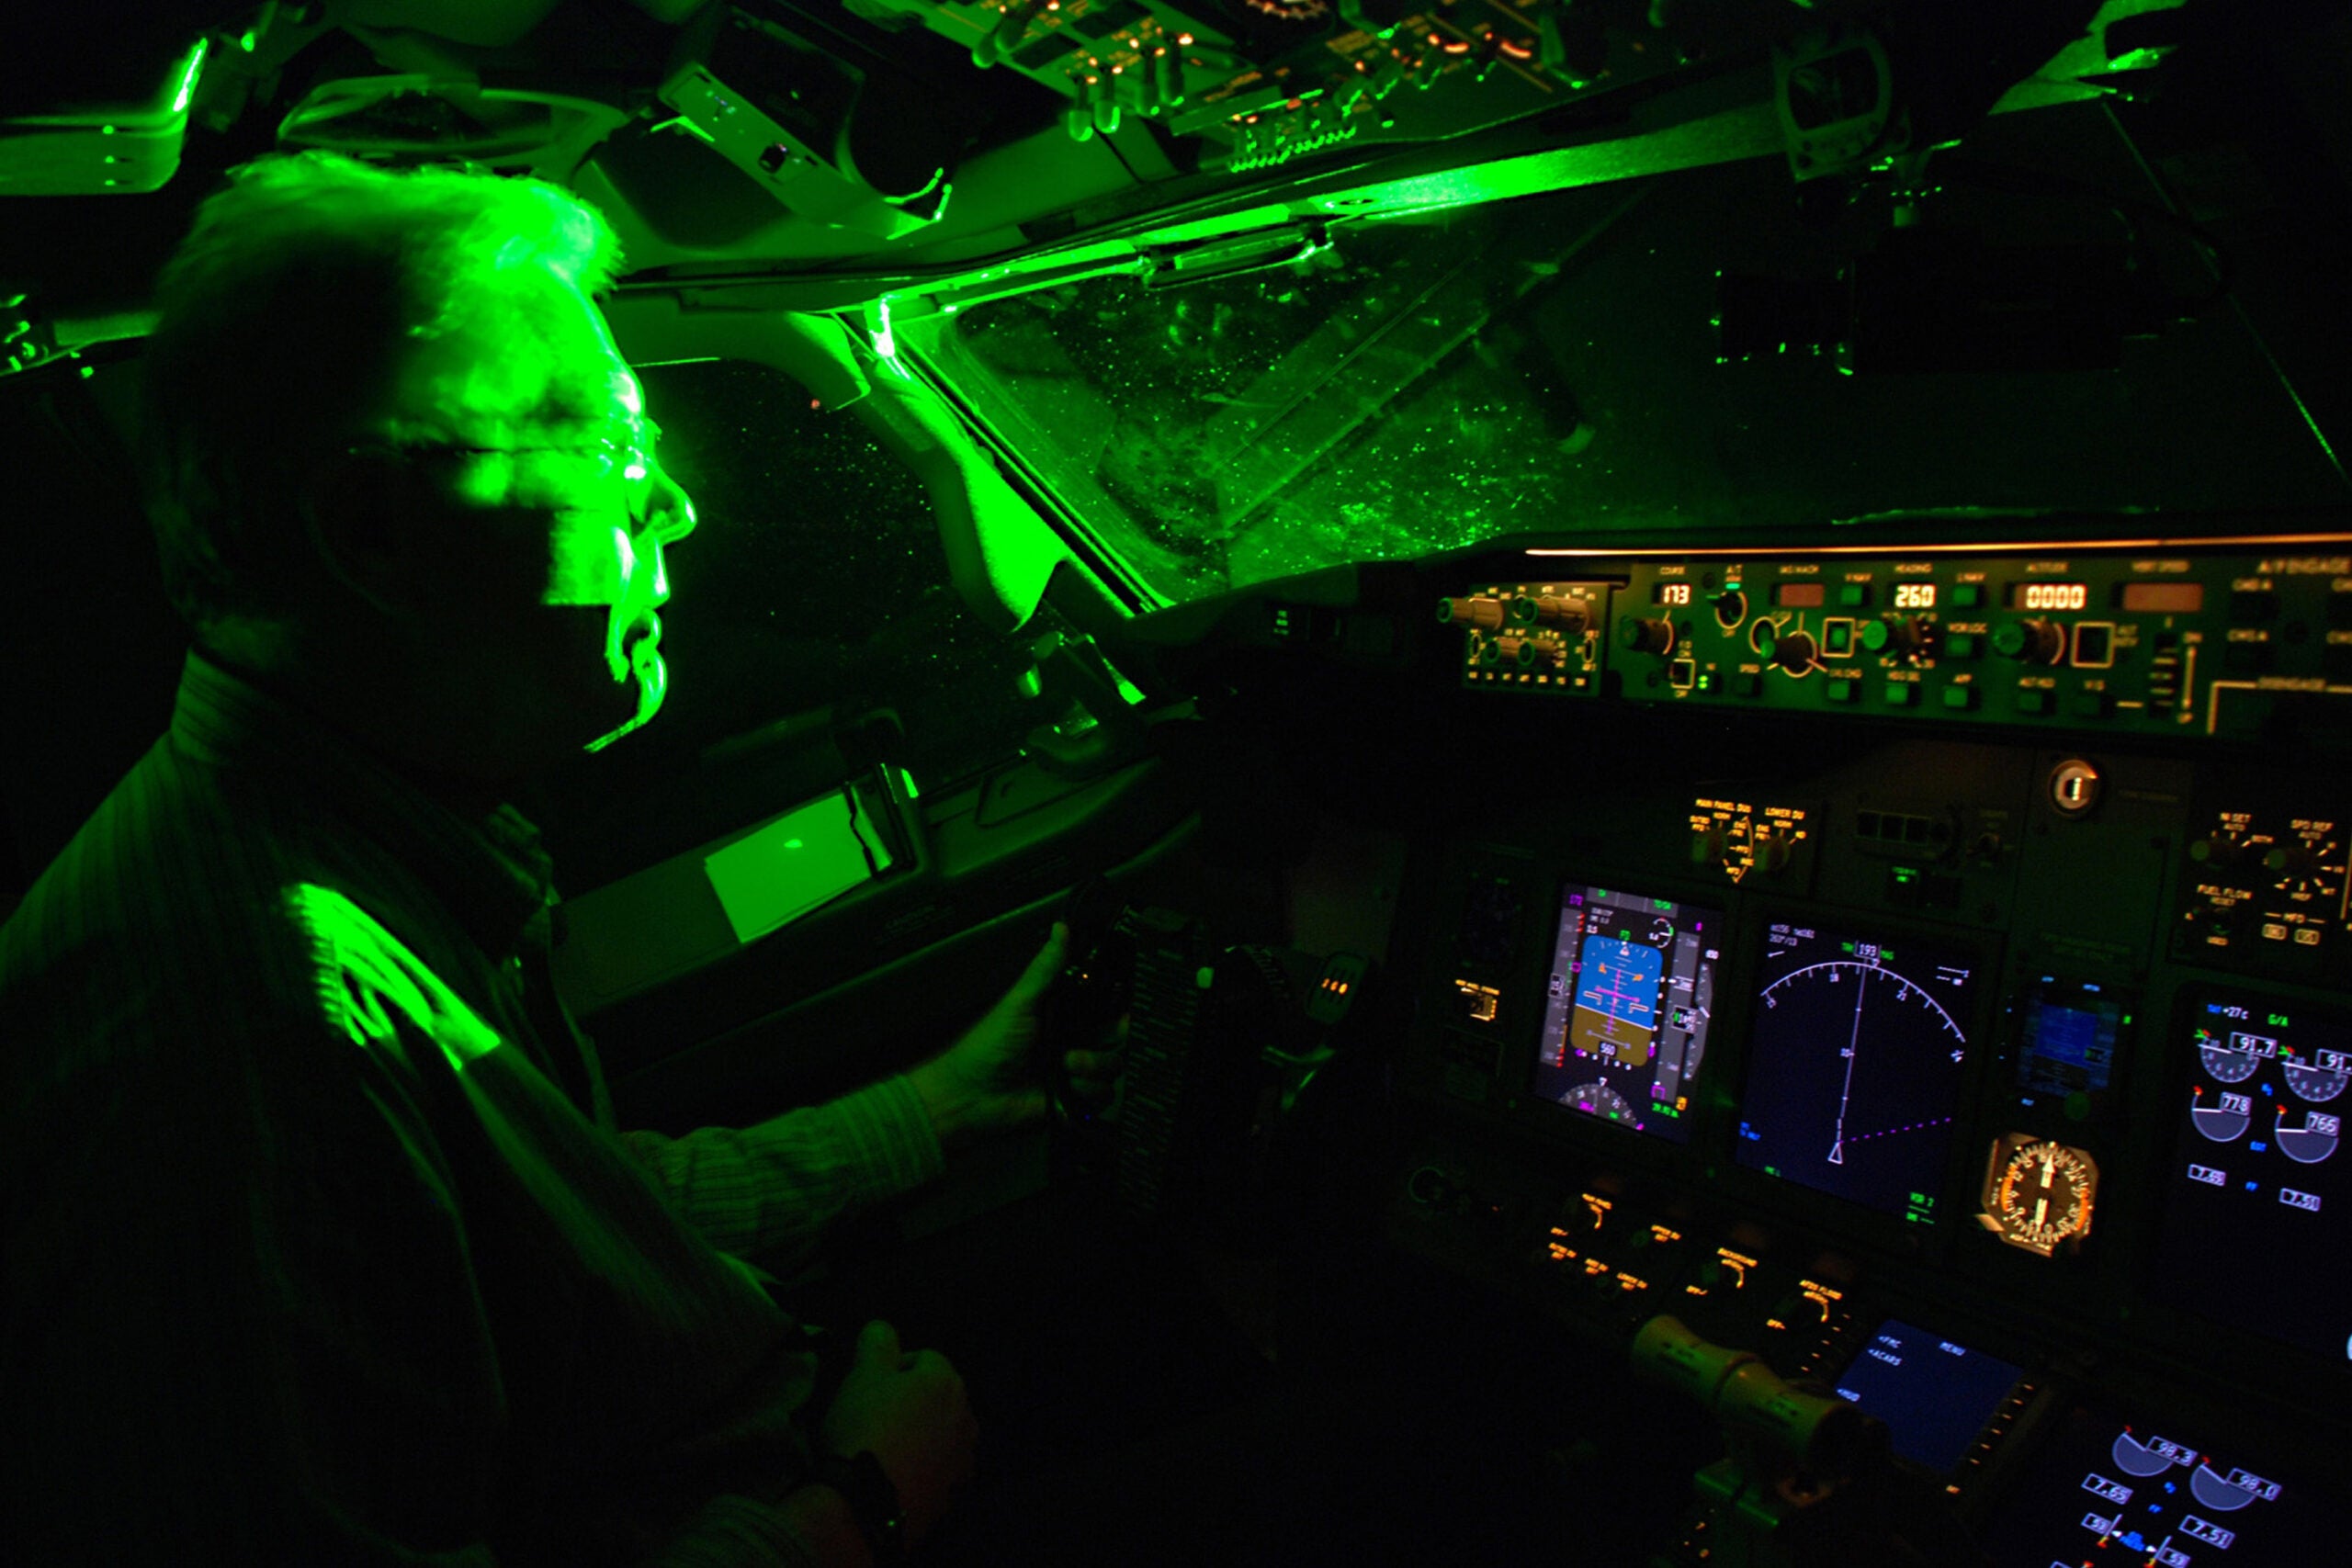 Pilots Report Numerous Laser Strike Incidents in Boston